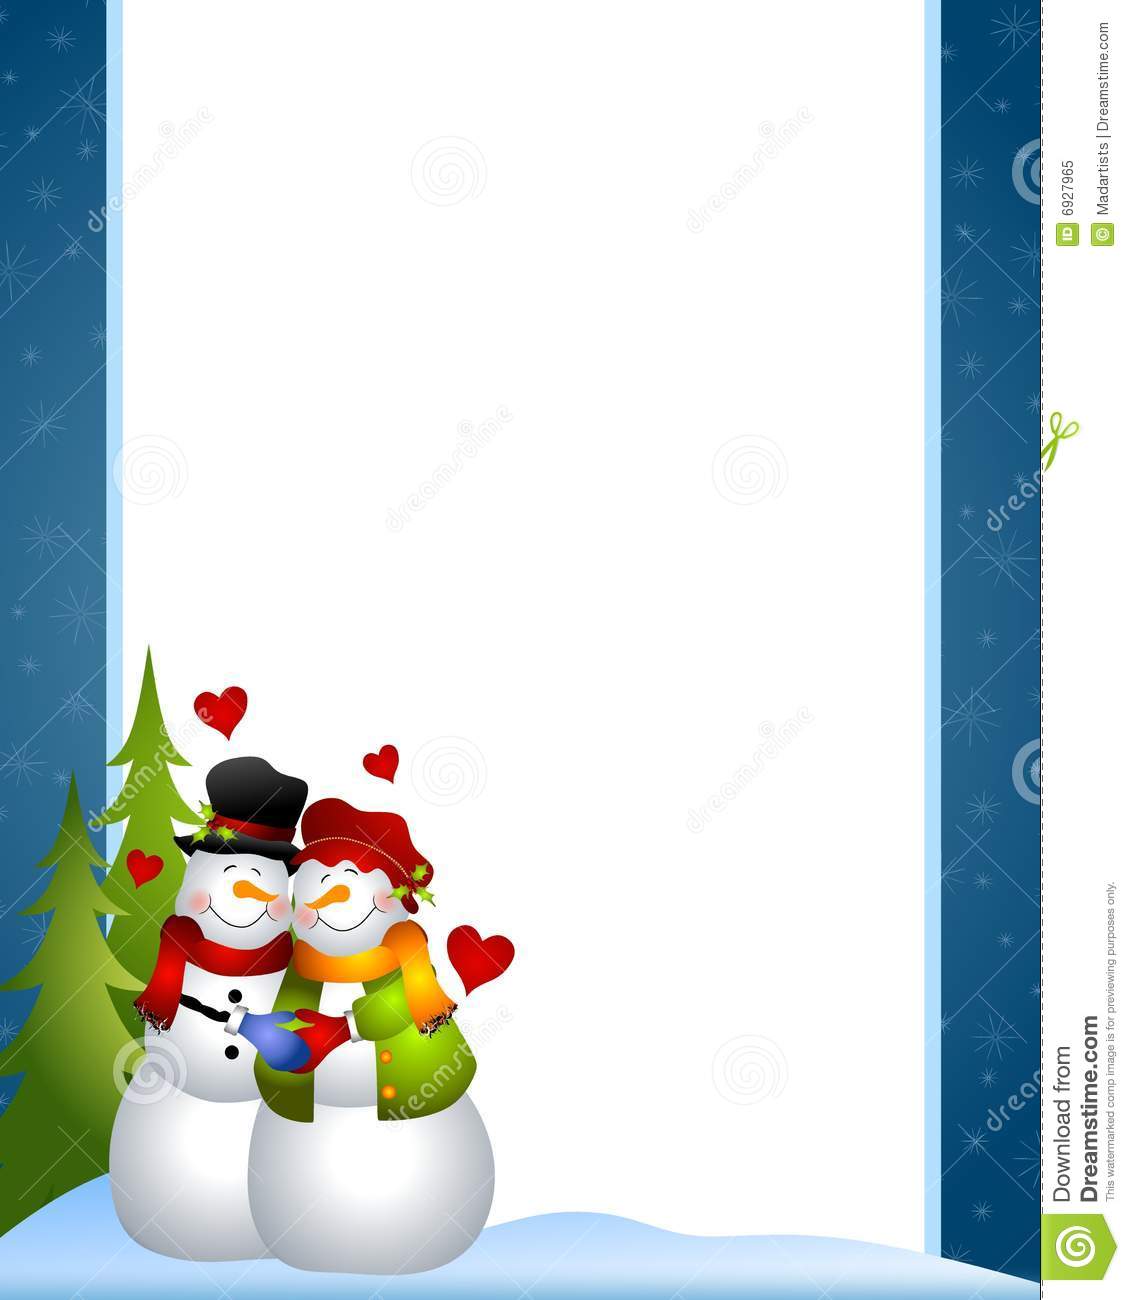 Clip Art Illustration Of A Snowman And Snow Woman Couple Embracing